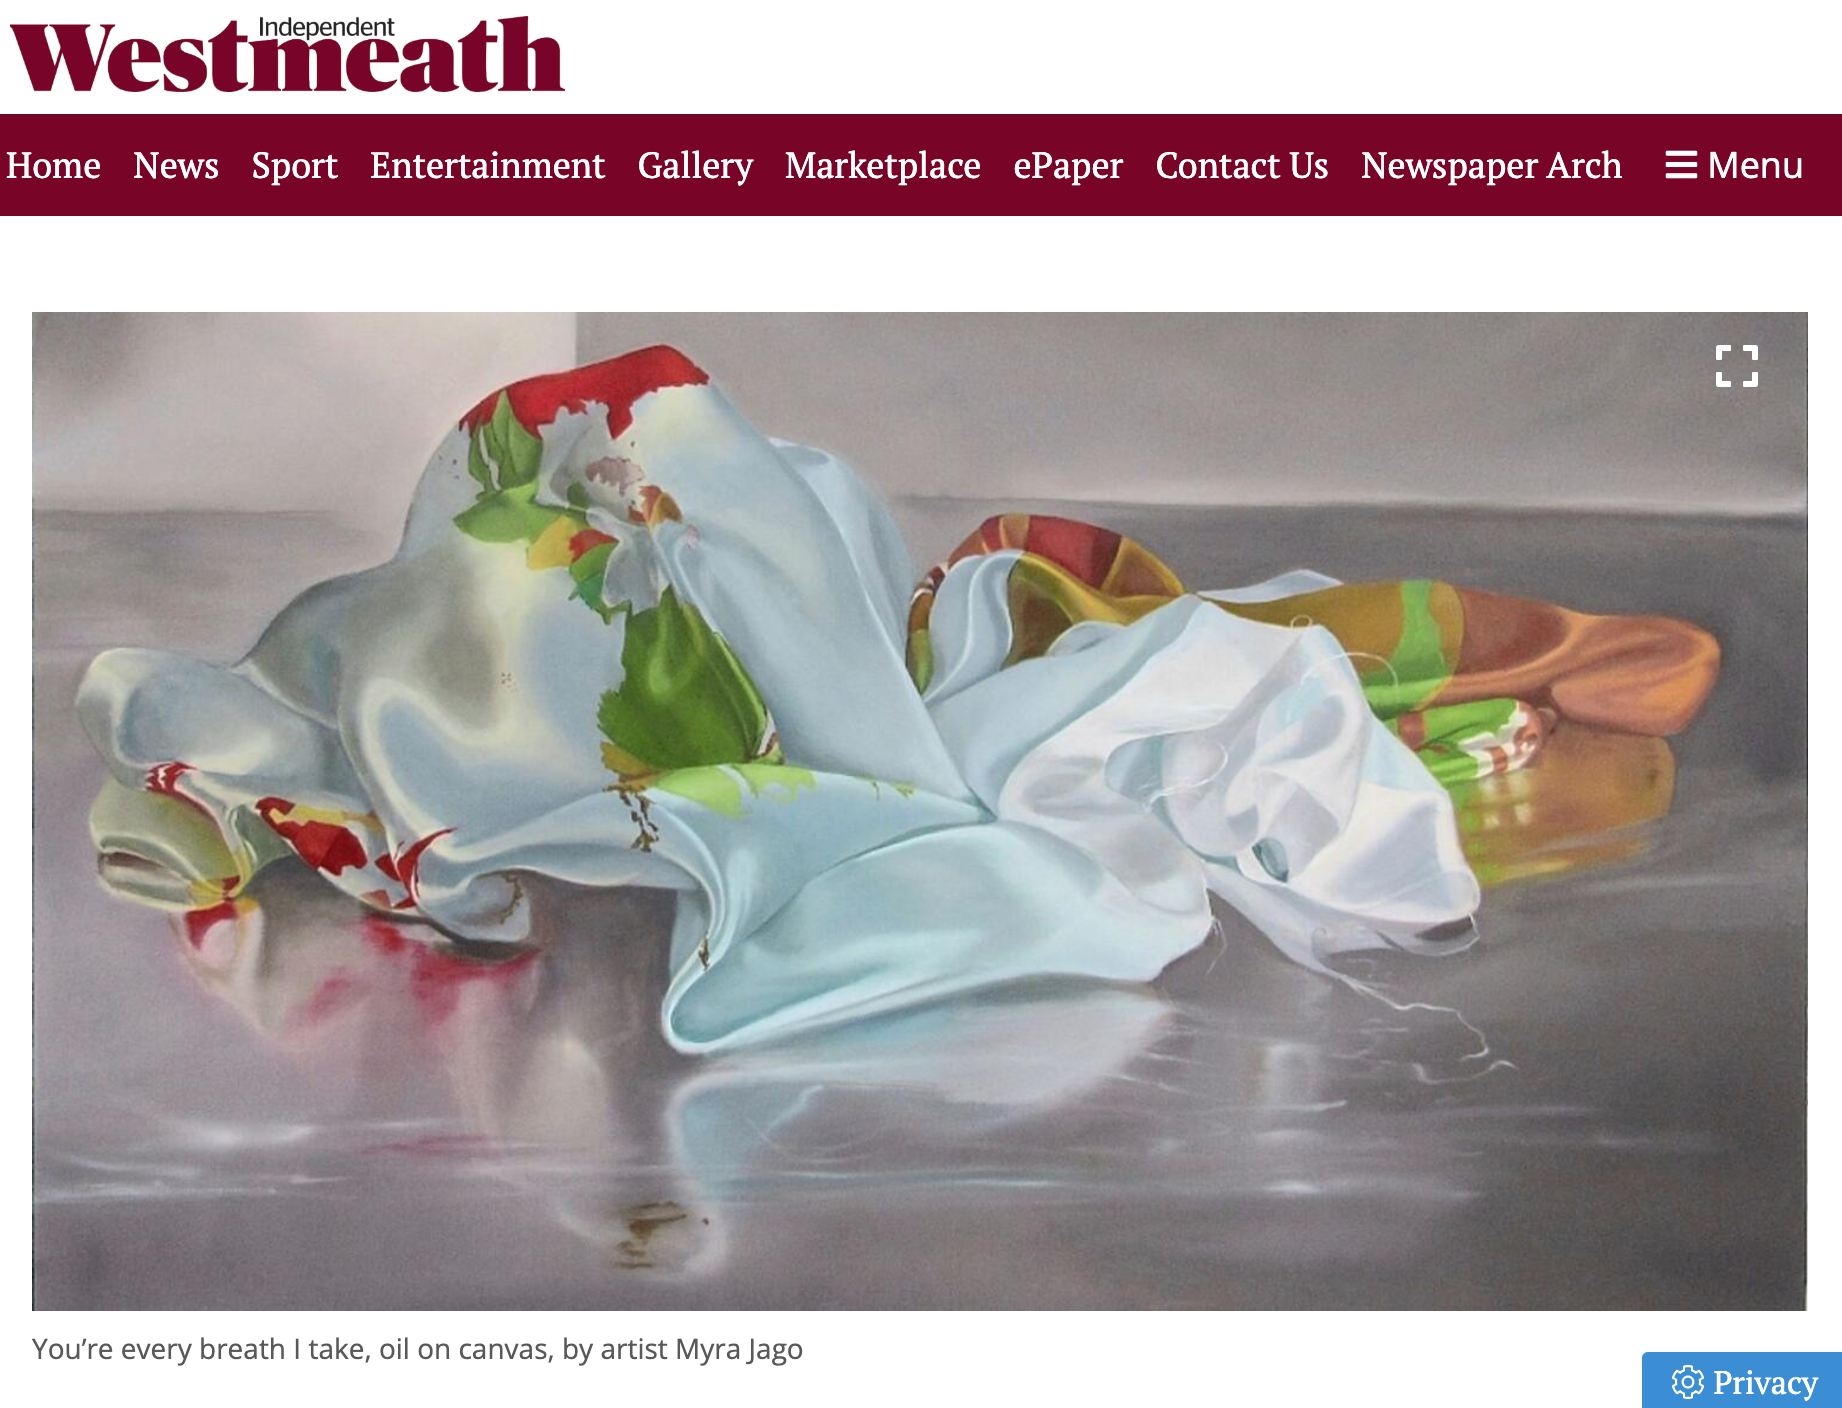 30-06-22_Independent Westmeath_Luan Gallery Show_p1.png